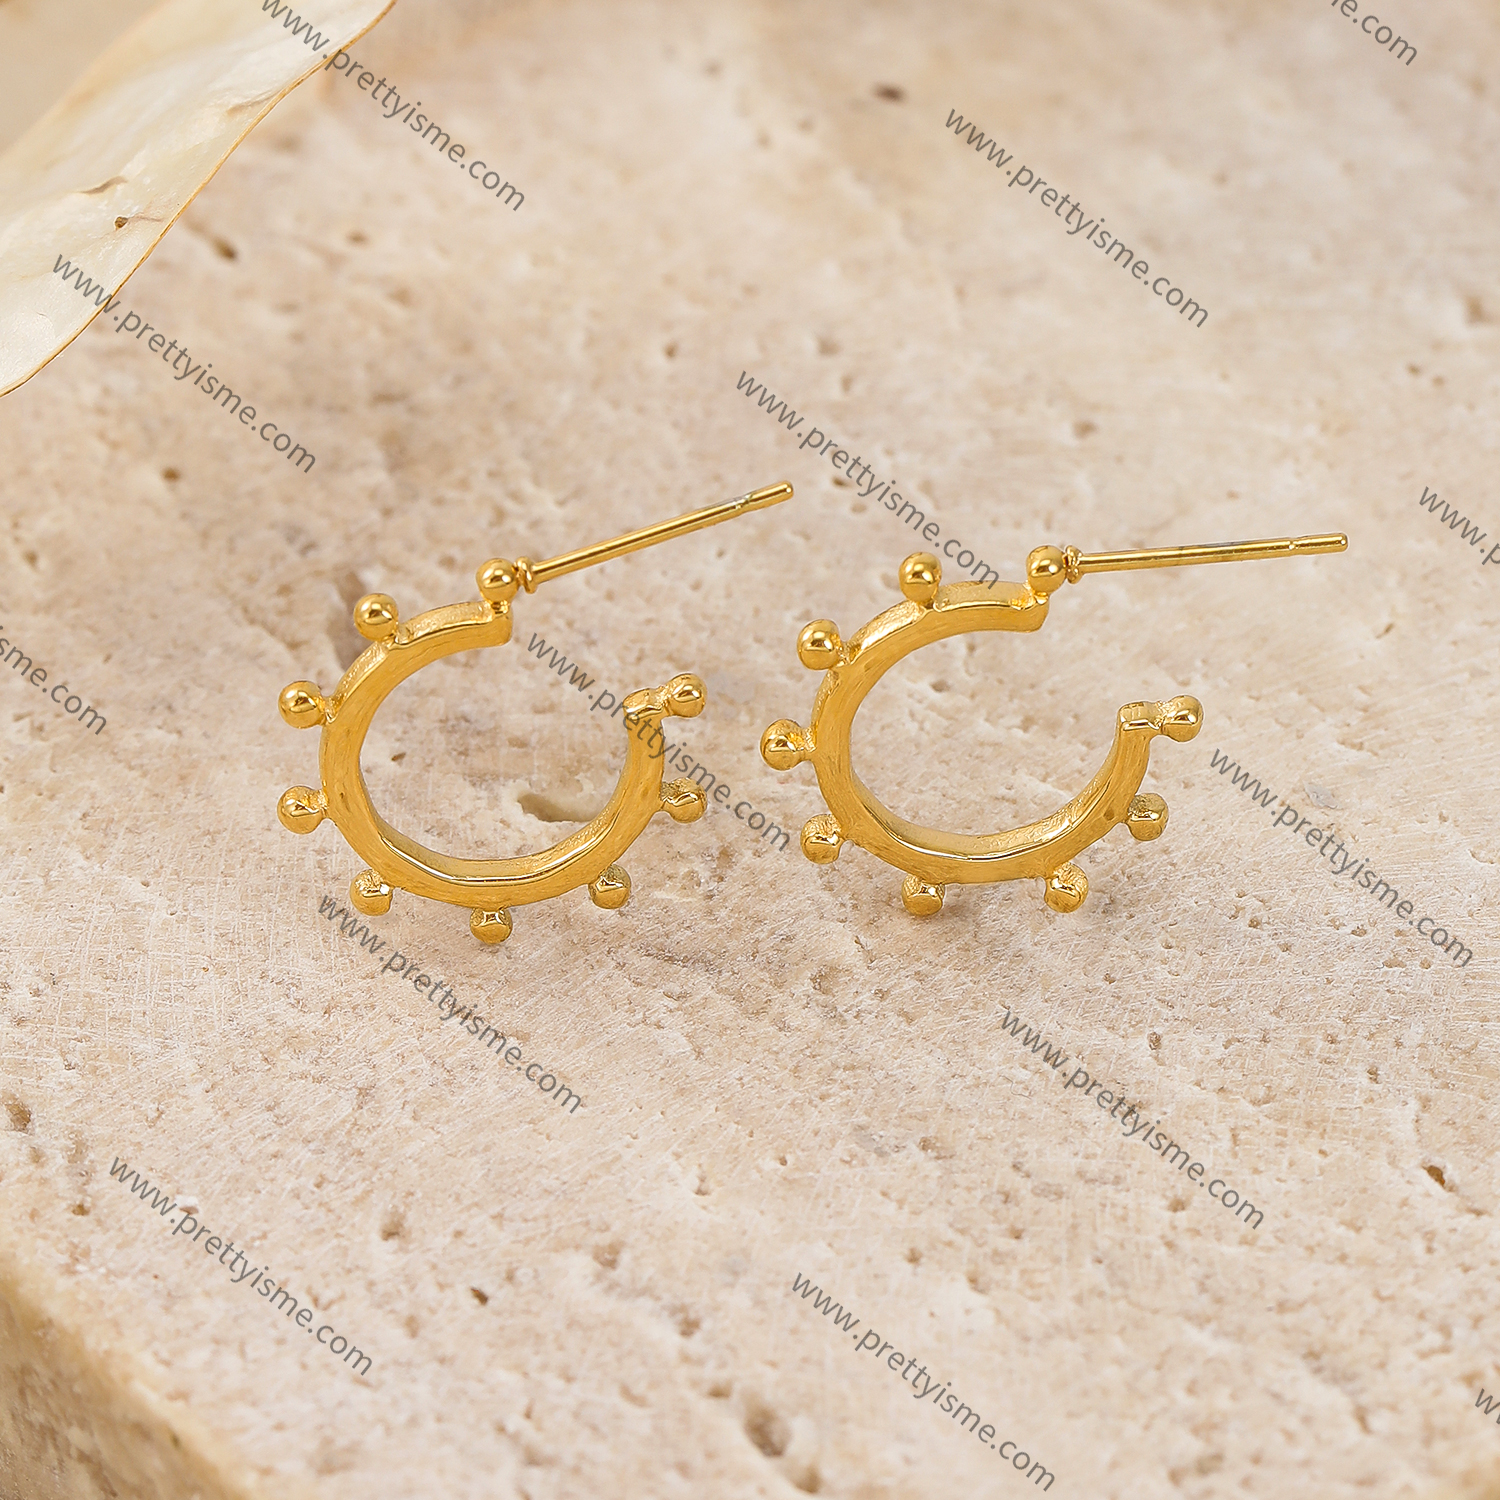 Half Arc Stainless Steel Earrings Gold Plated 18K Earrings with Gold Beads.webp